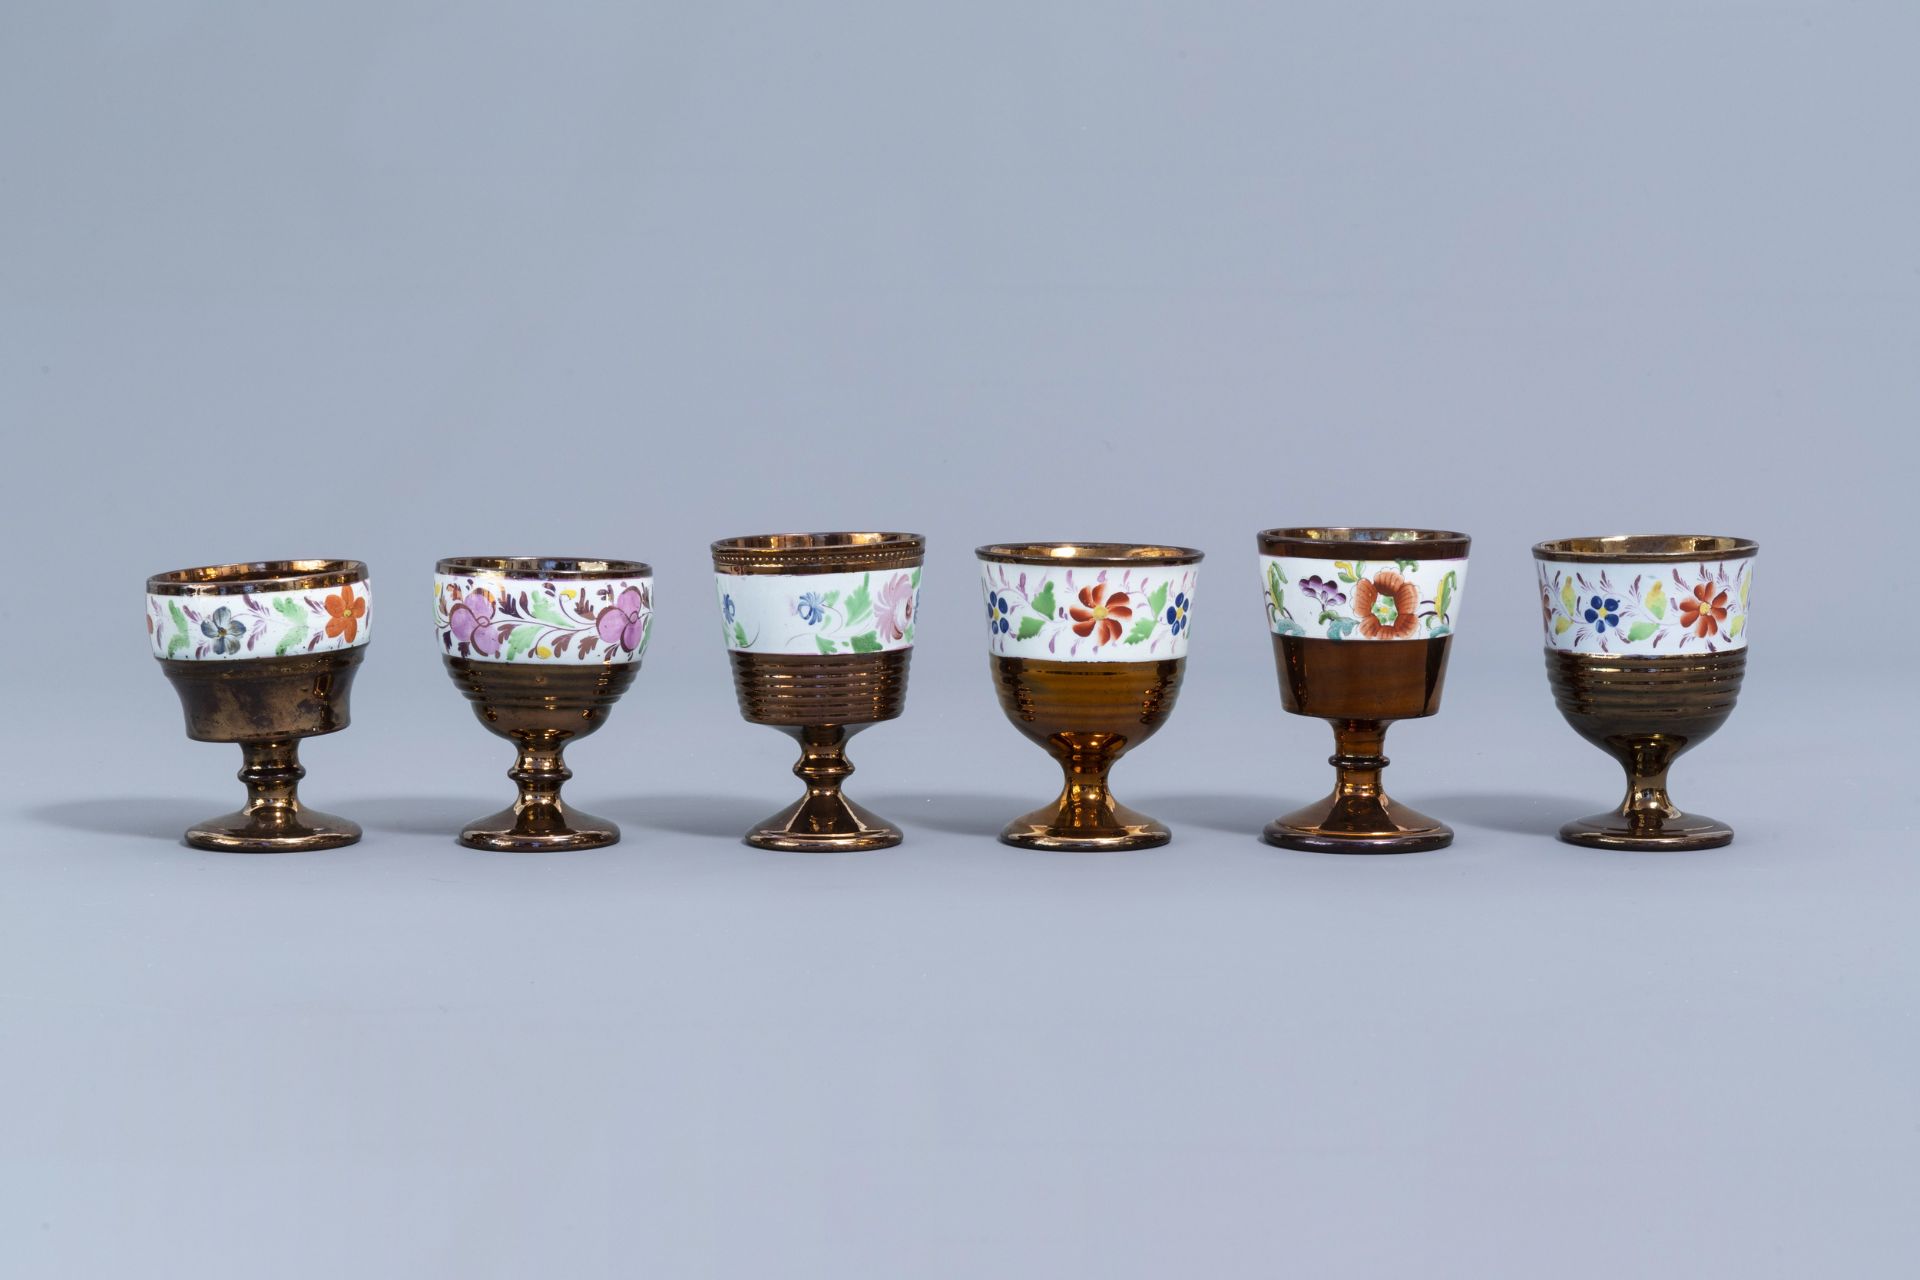 A varied collection of English lustreware items with polychrome floral design, 19th C. - Image 49 of 64